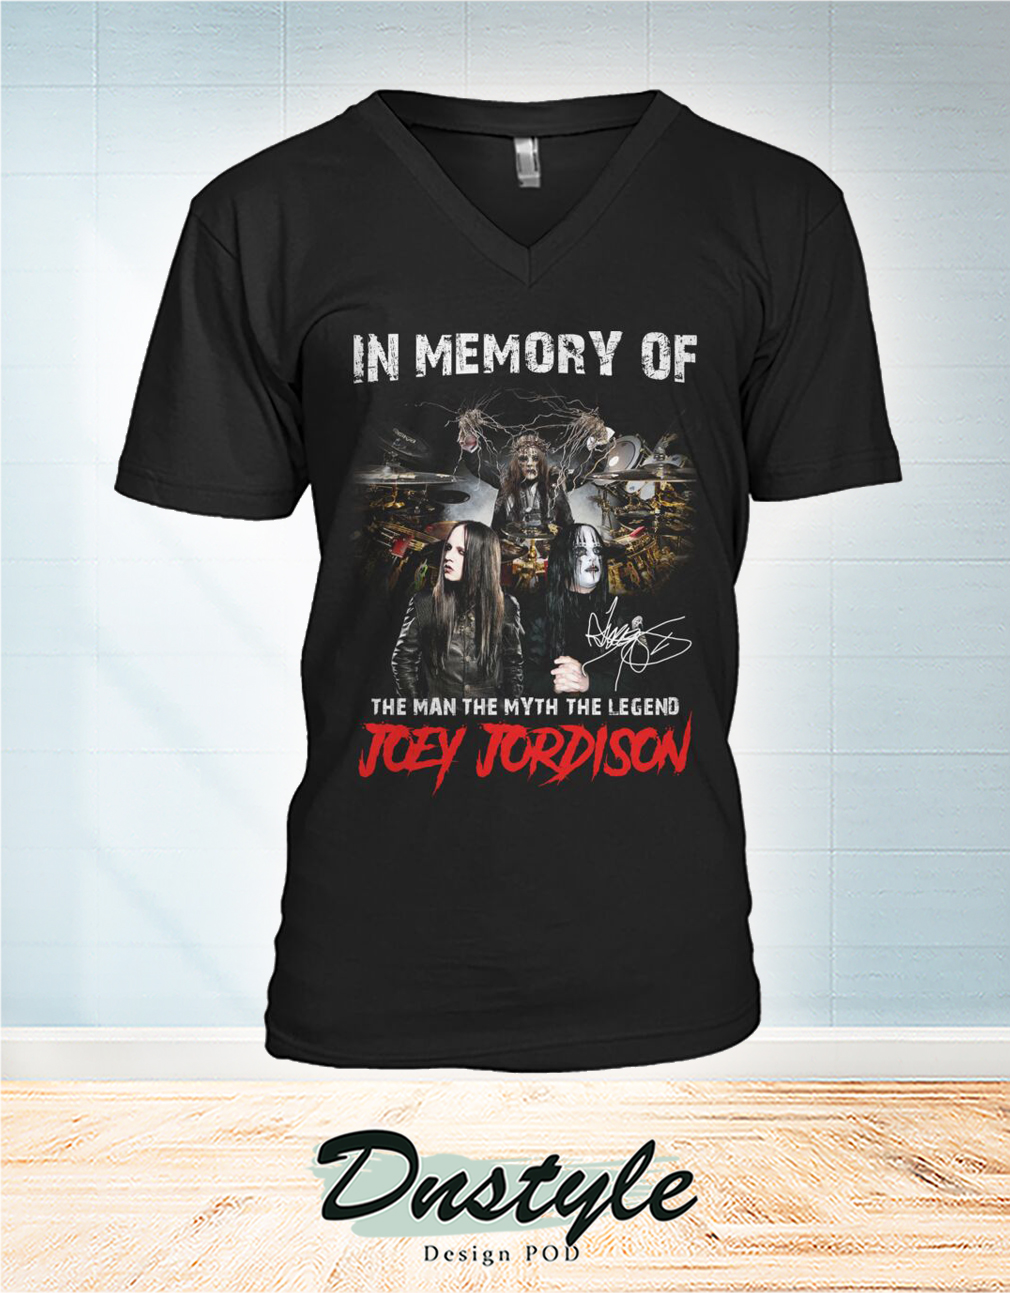 In memory of the man the myth the legend Joey Jordison v-neck